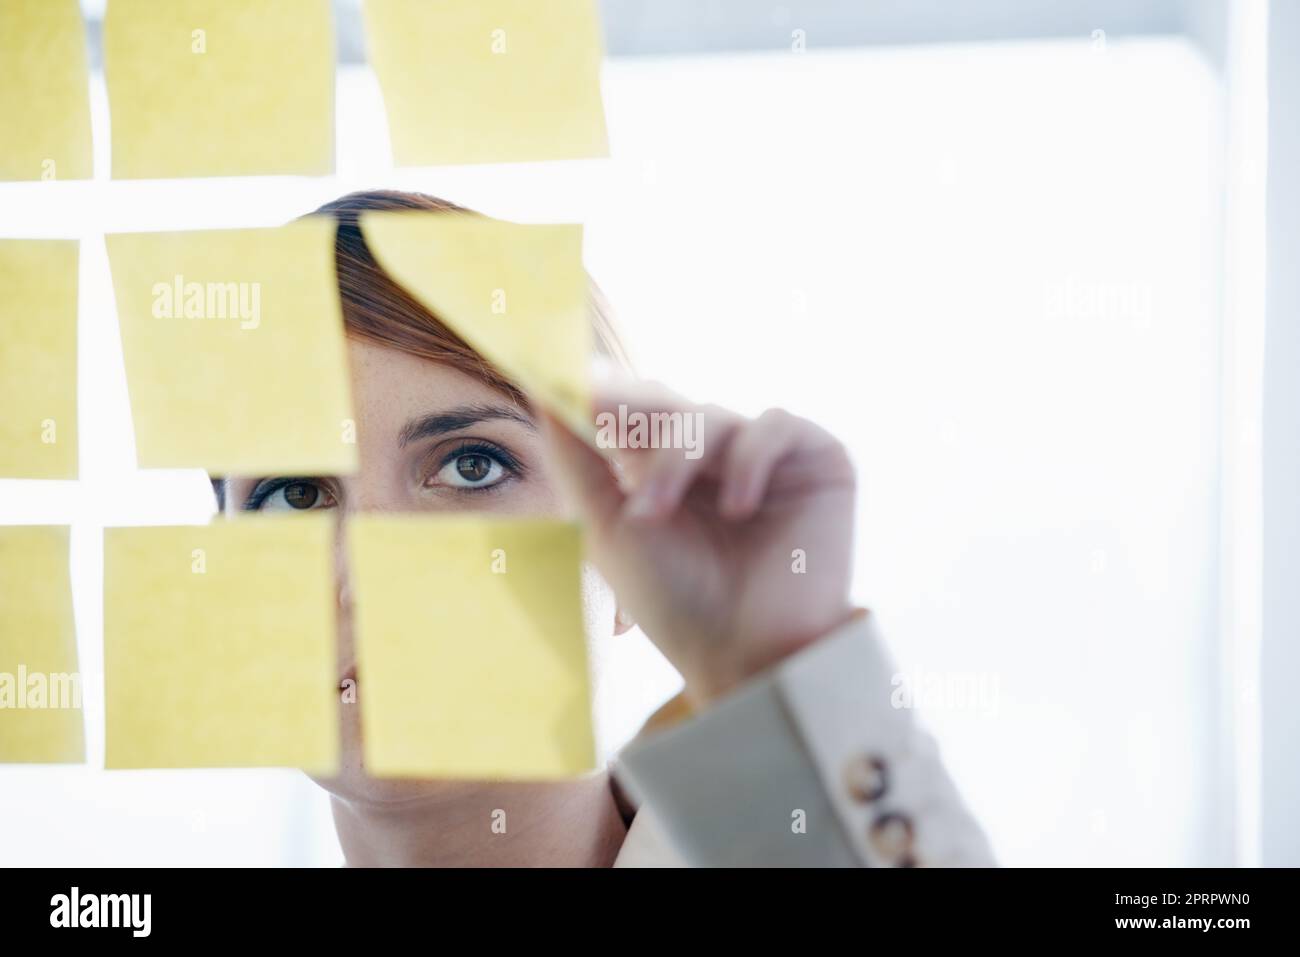 Bringing order to her strategy. a businesswoman arranging sticky notes on a glass wal. Stock Photo